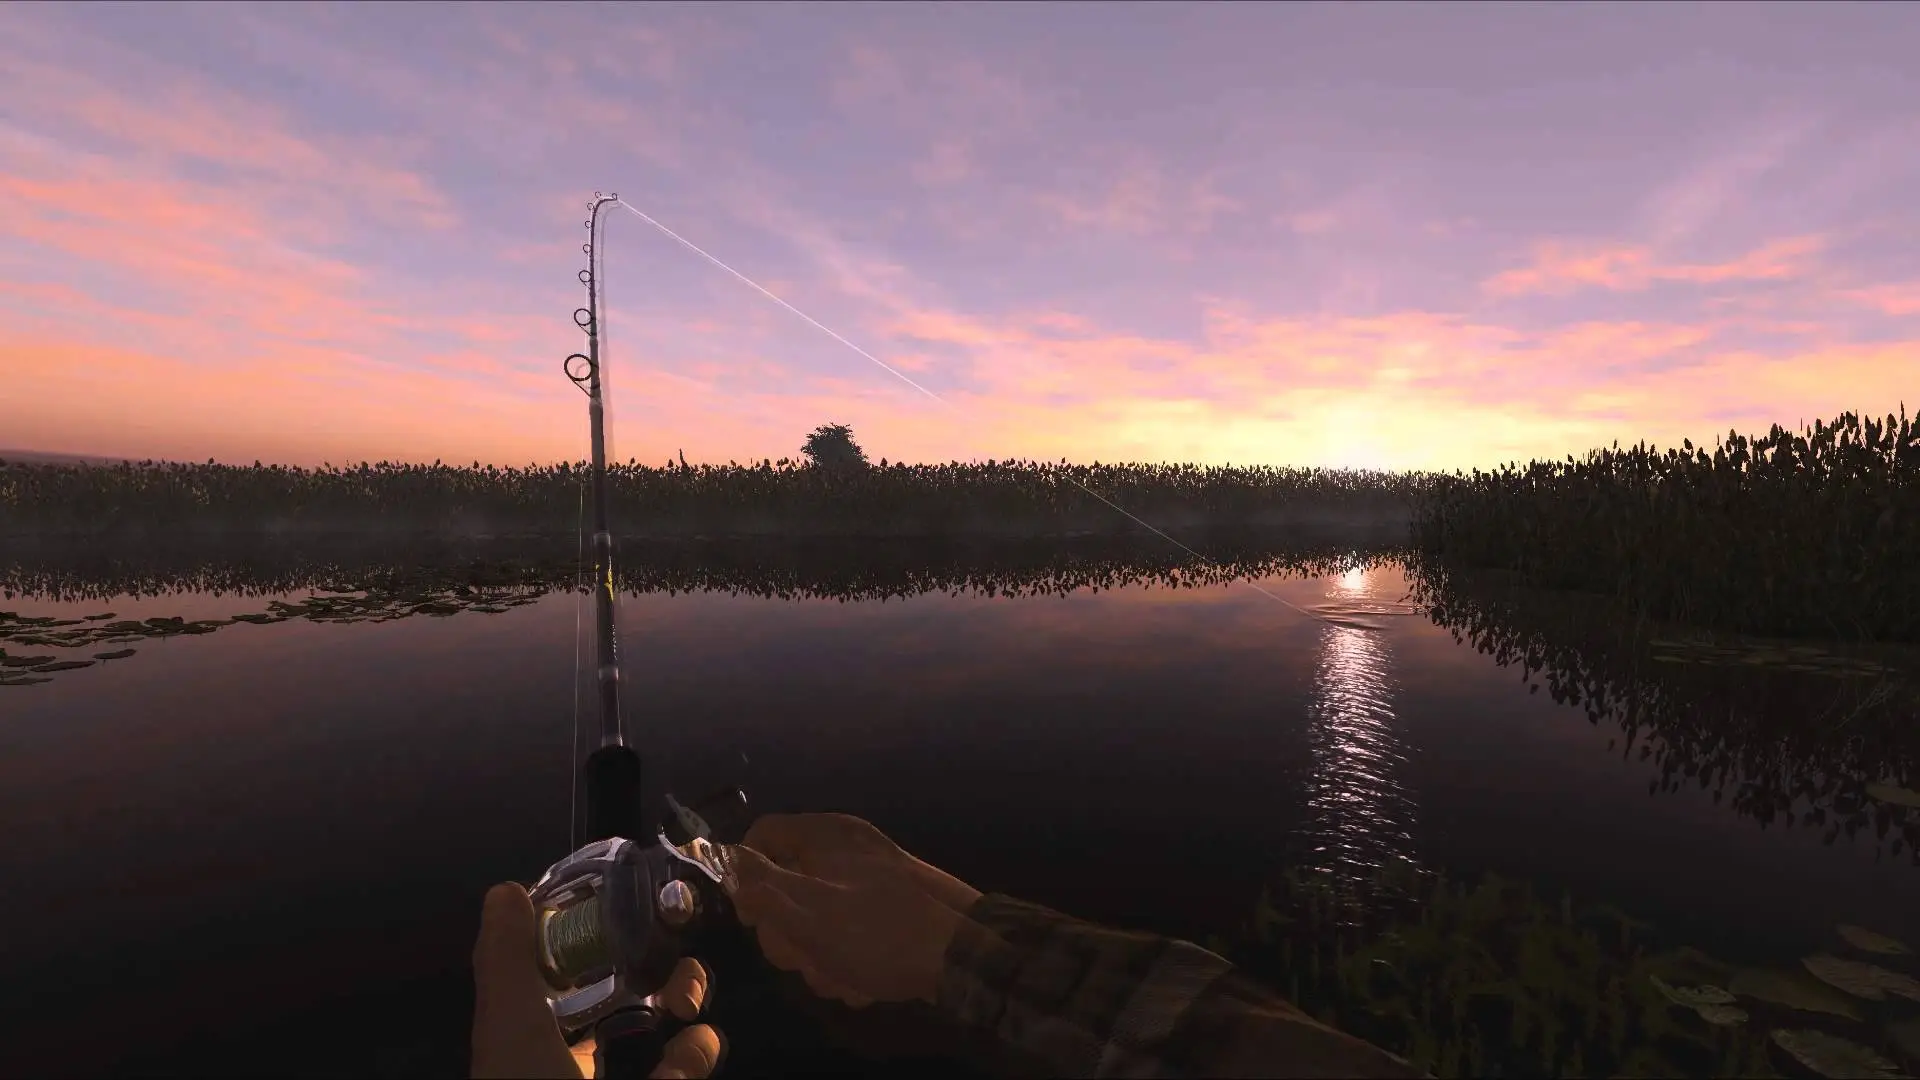 Video Game Fishing Simulator Based on Final Fantasy XV? - Wide Open  Spaces